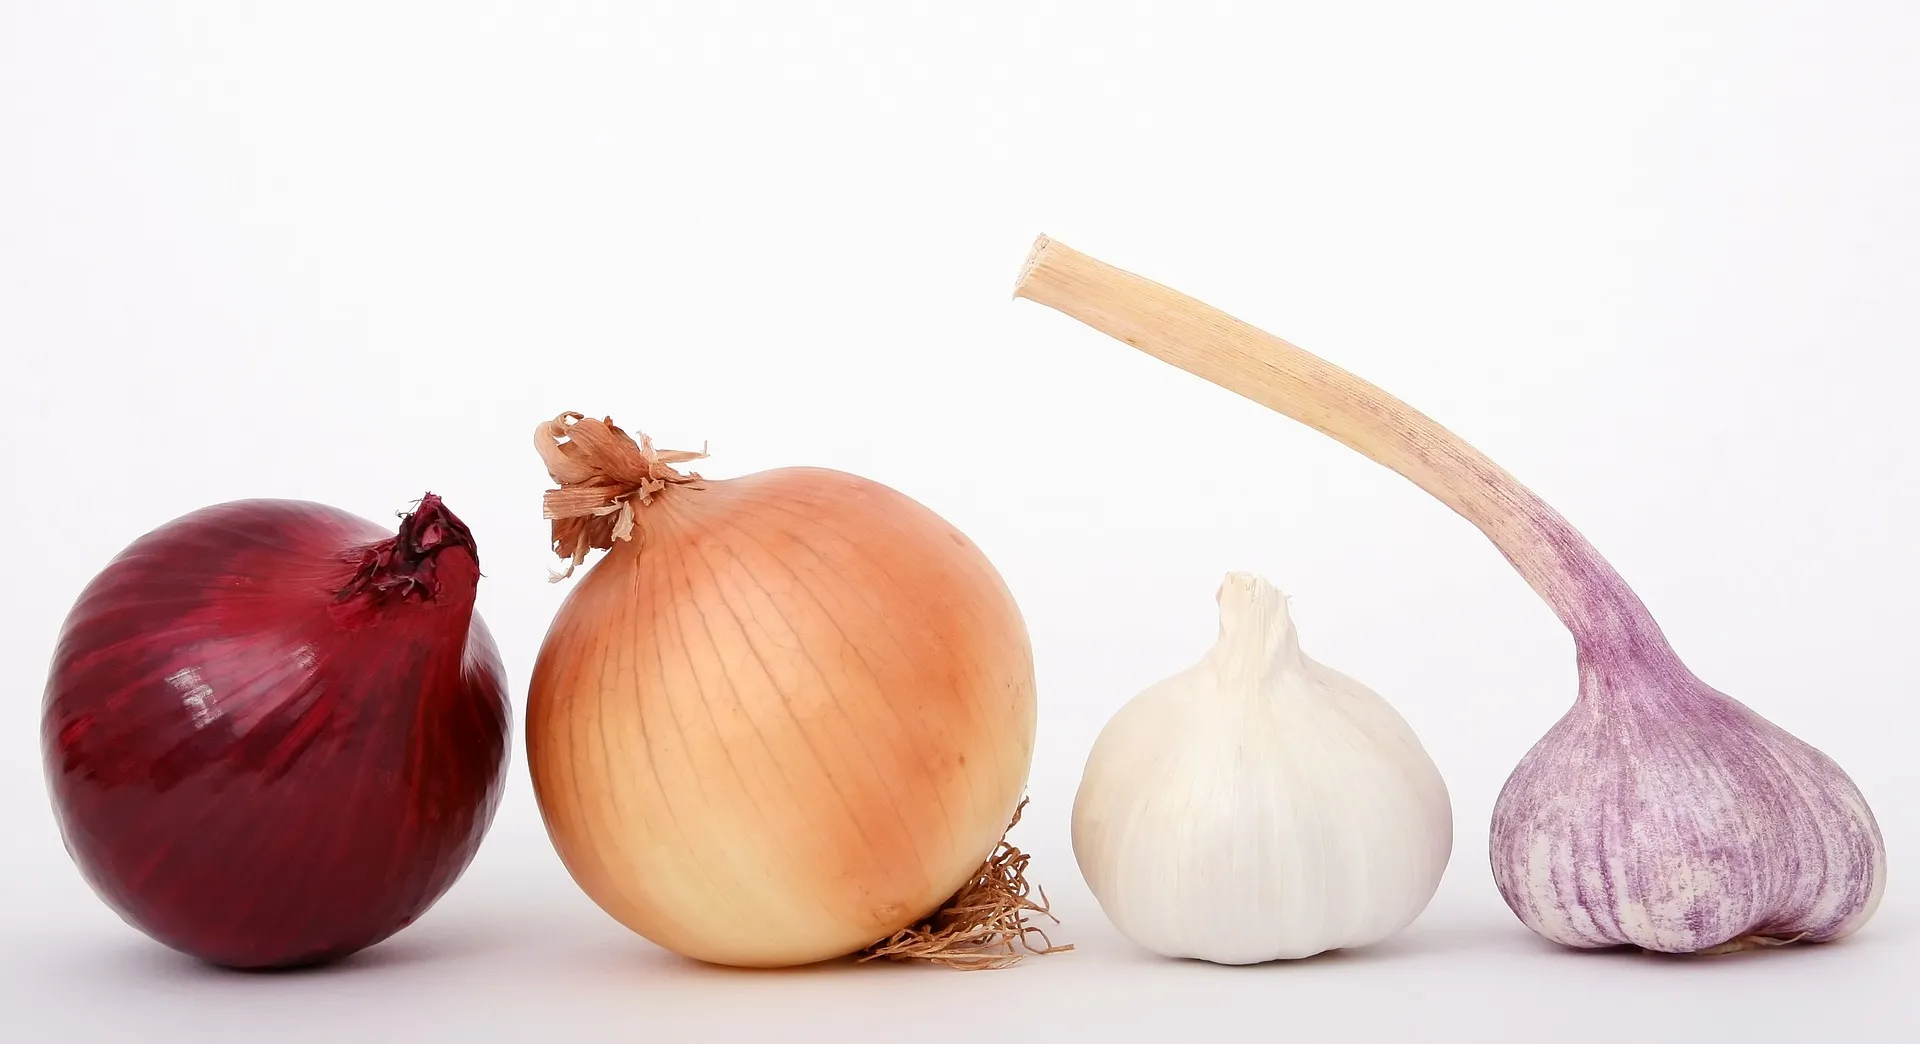 Onions & Garlic contain sulfur. (Recommended)  